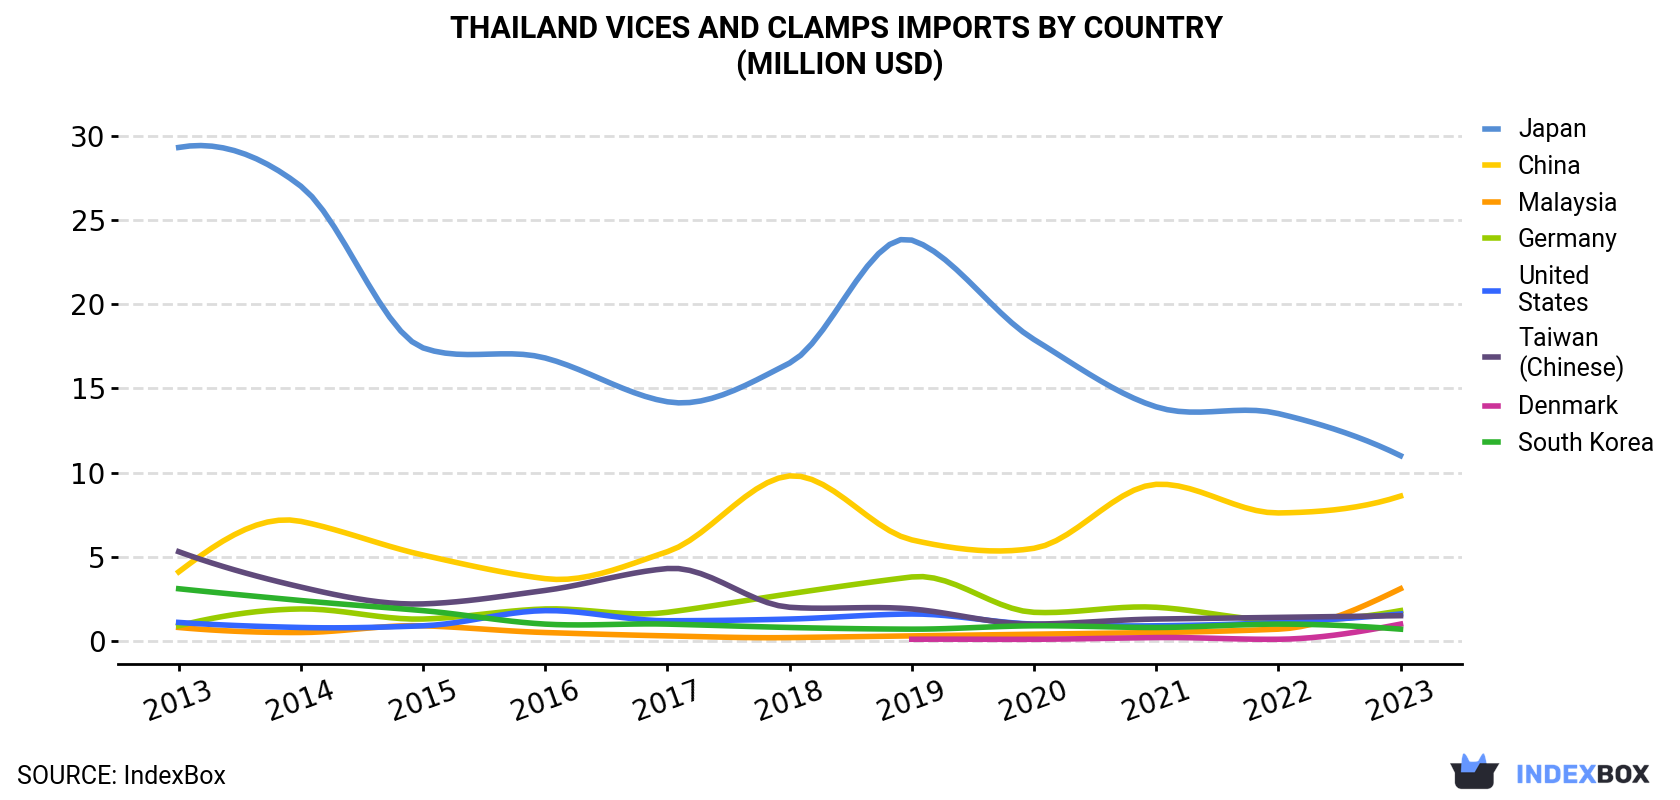 Thailand Vices And Clamps Imports By Country (Million USD)